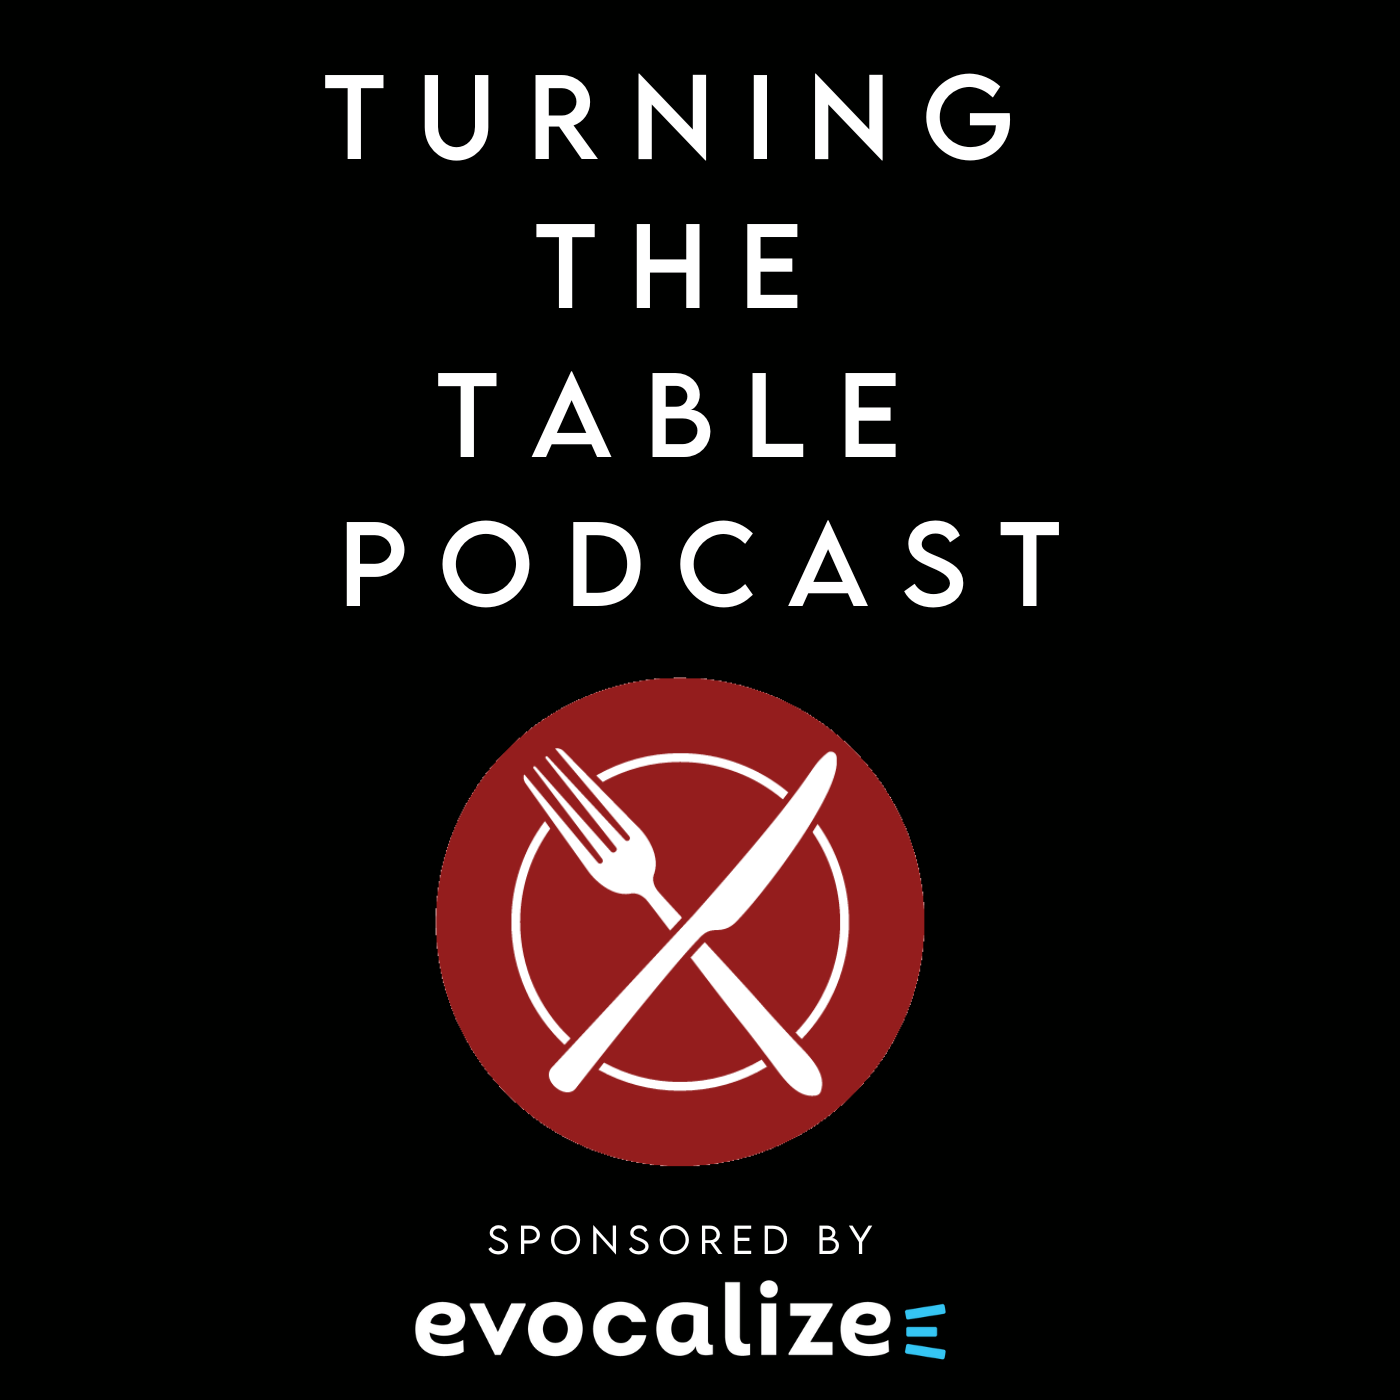 Artwork for podcast Turning the Table